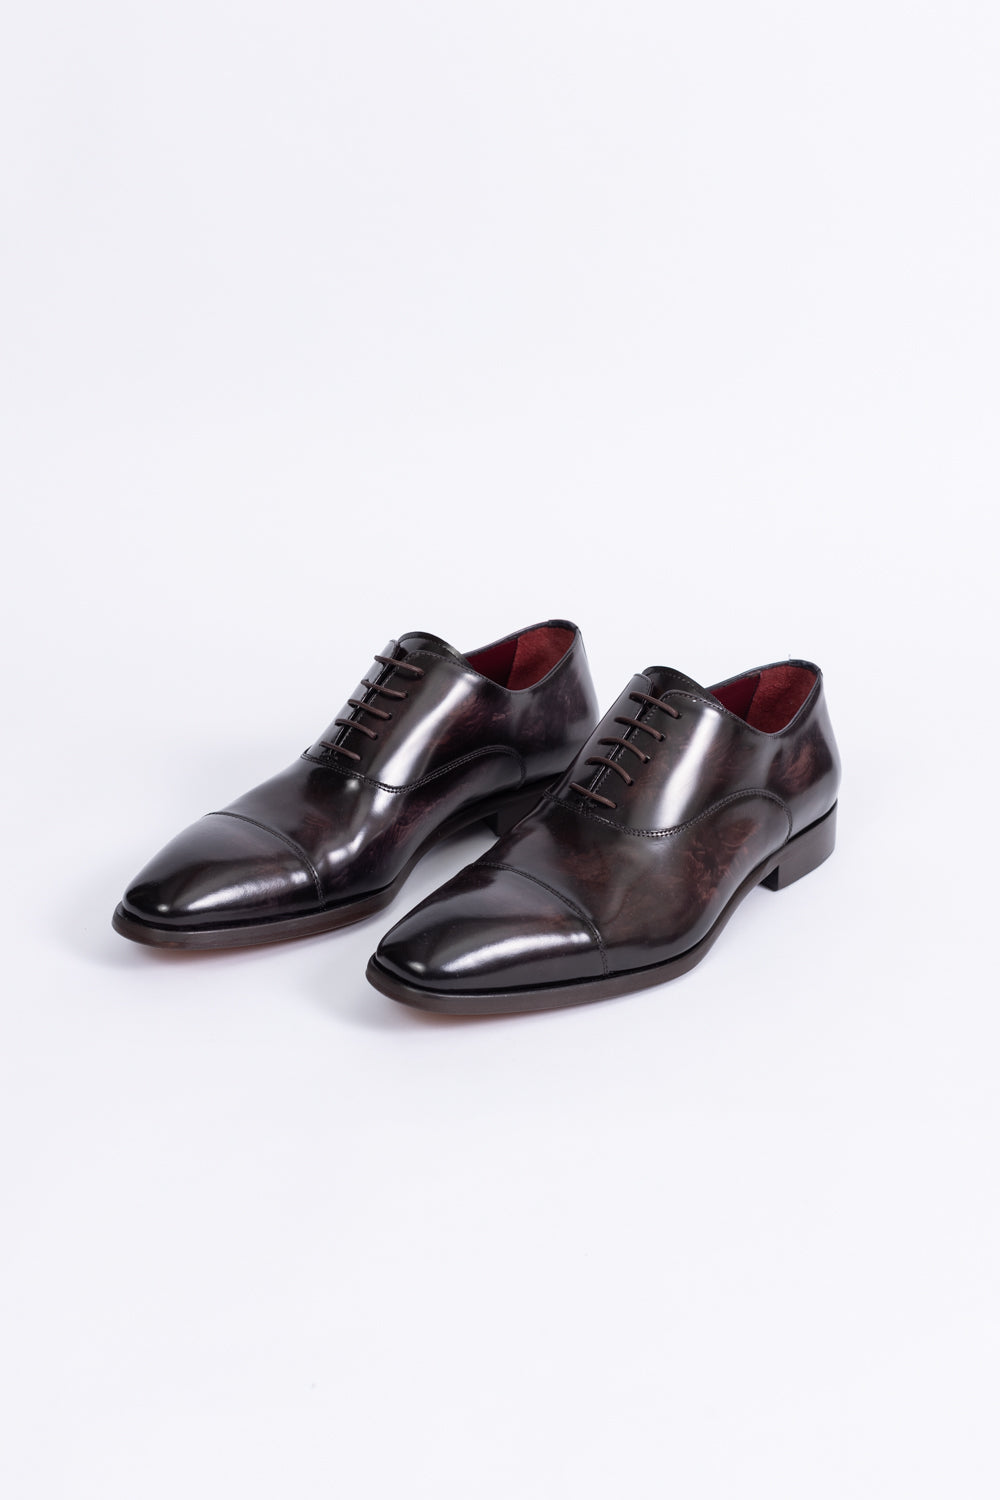 Classic Leather Oxford Shoes 343